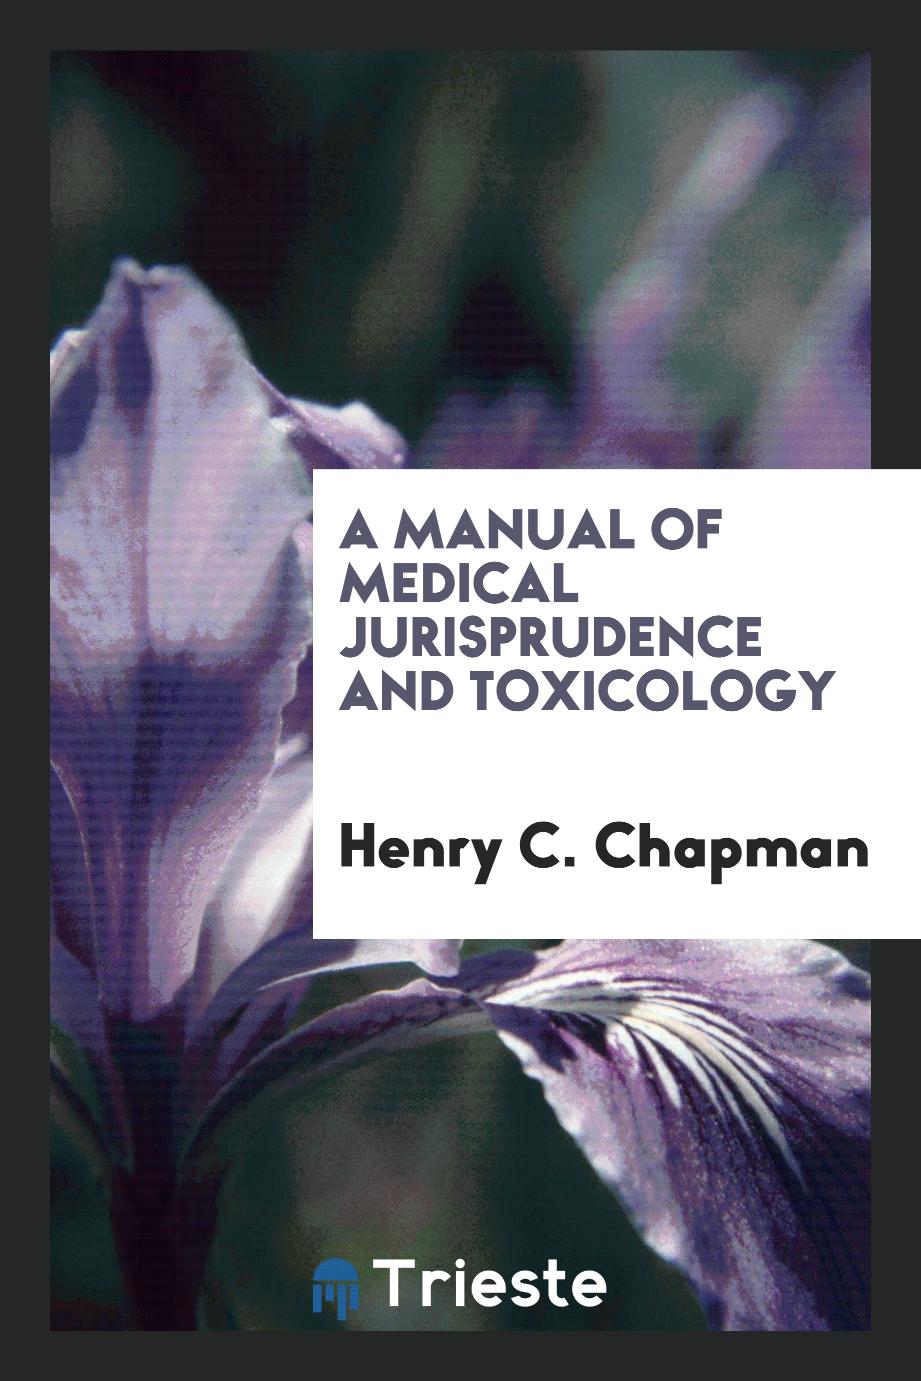 Henry C. Chapman - A Manual of Medical Jurisprudence and Toxicology